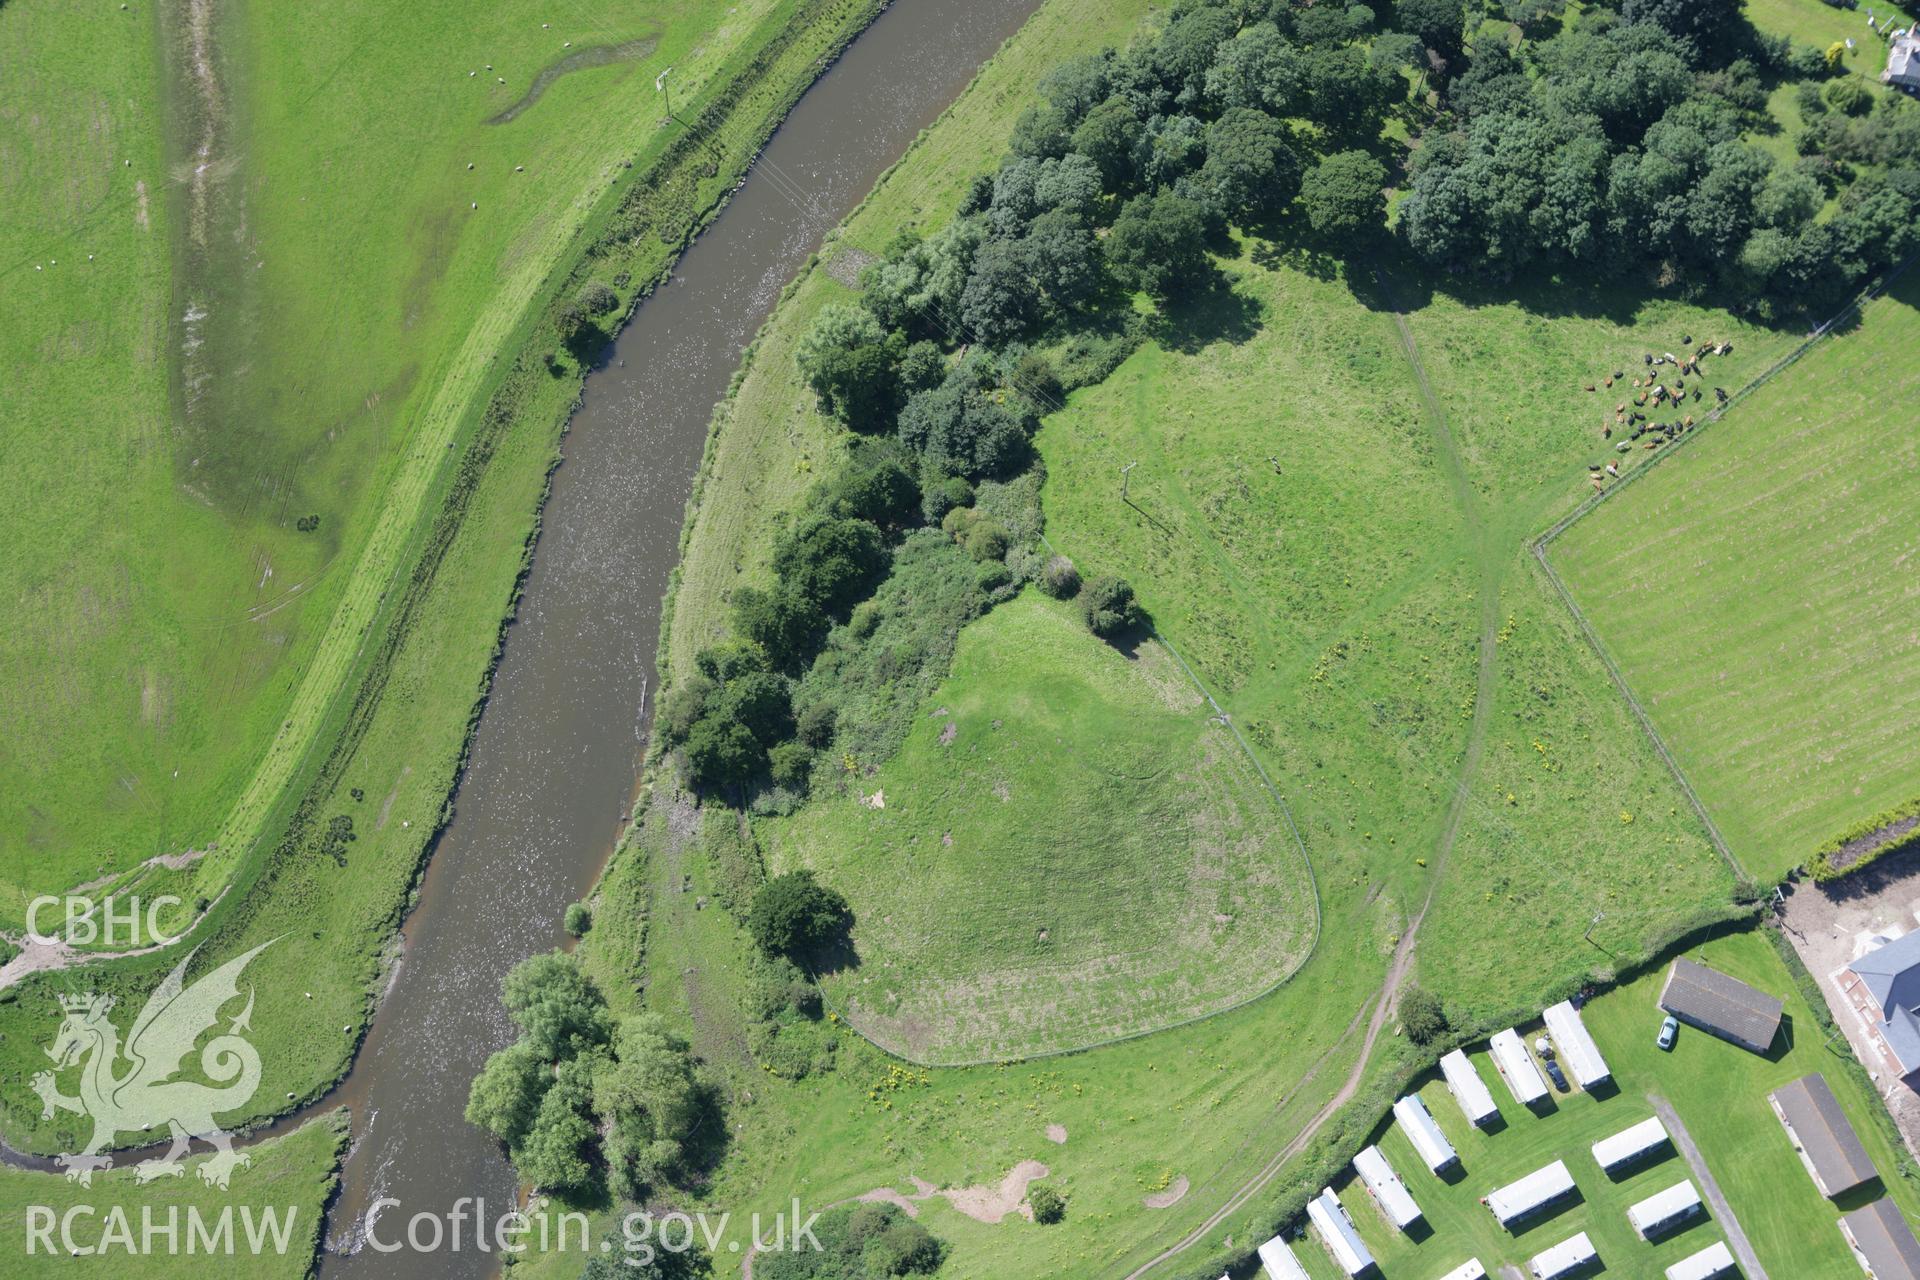 RCAHMW colour oblique aerial photograph of Twt Hill Motte and Bailey, Rhuddlan. Taken on 31 July 2007 by Toby Driver